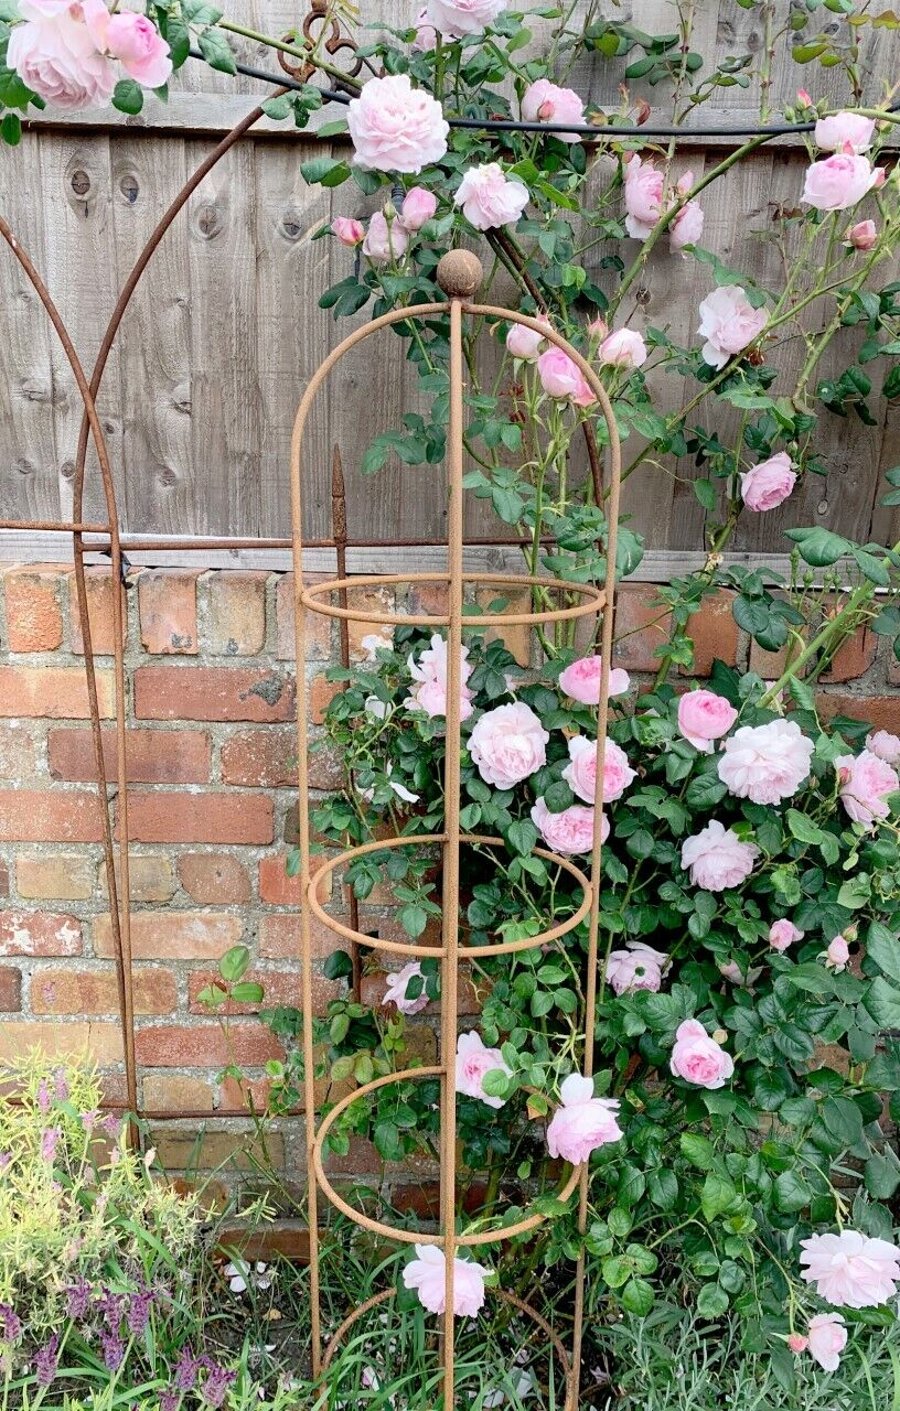 Large Rusty Metal Garden Obelisk 1.75m, Tall Plant Support Round Frame